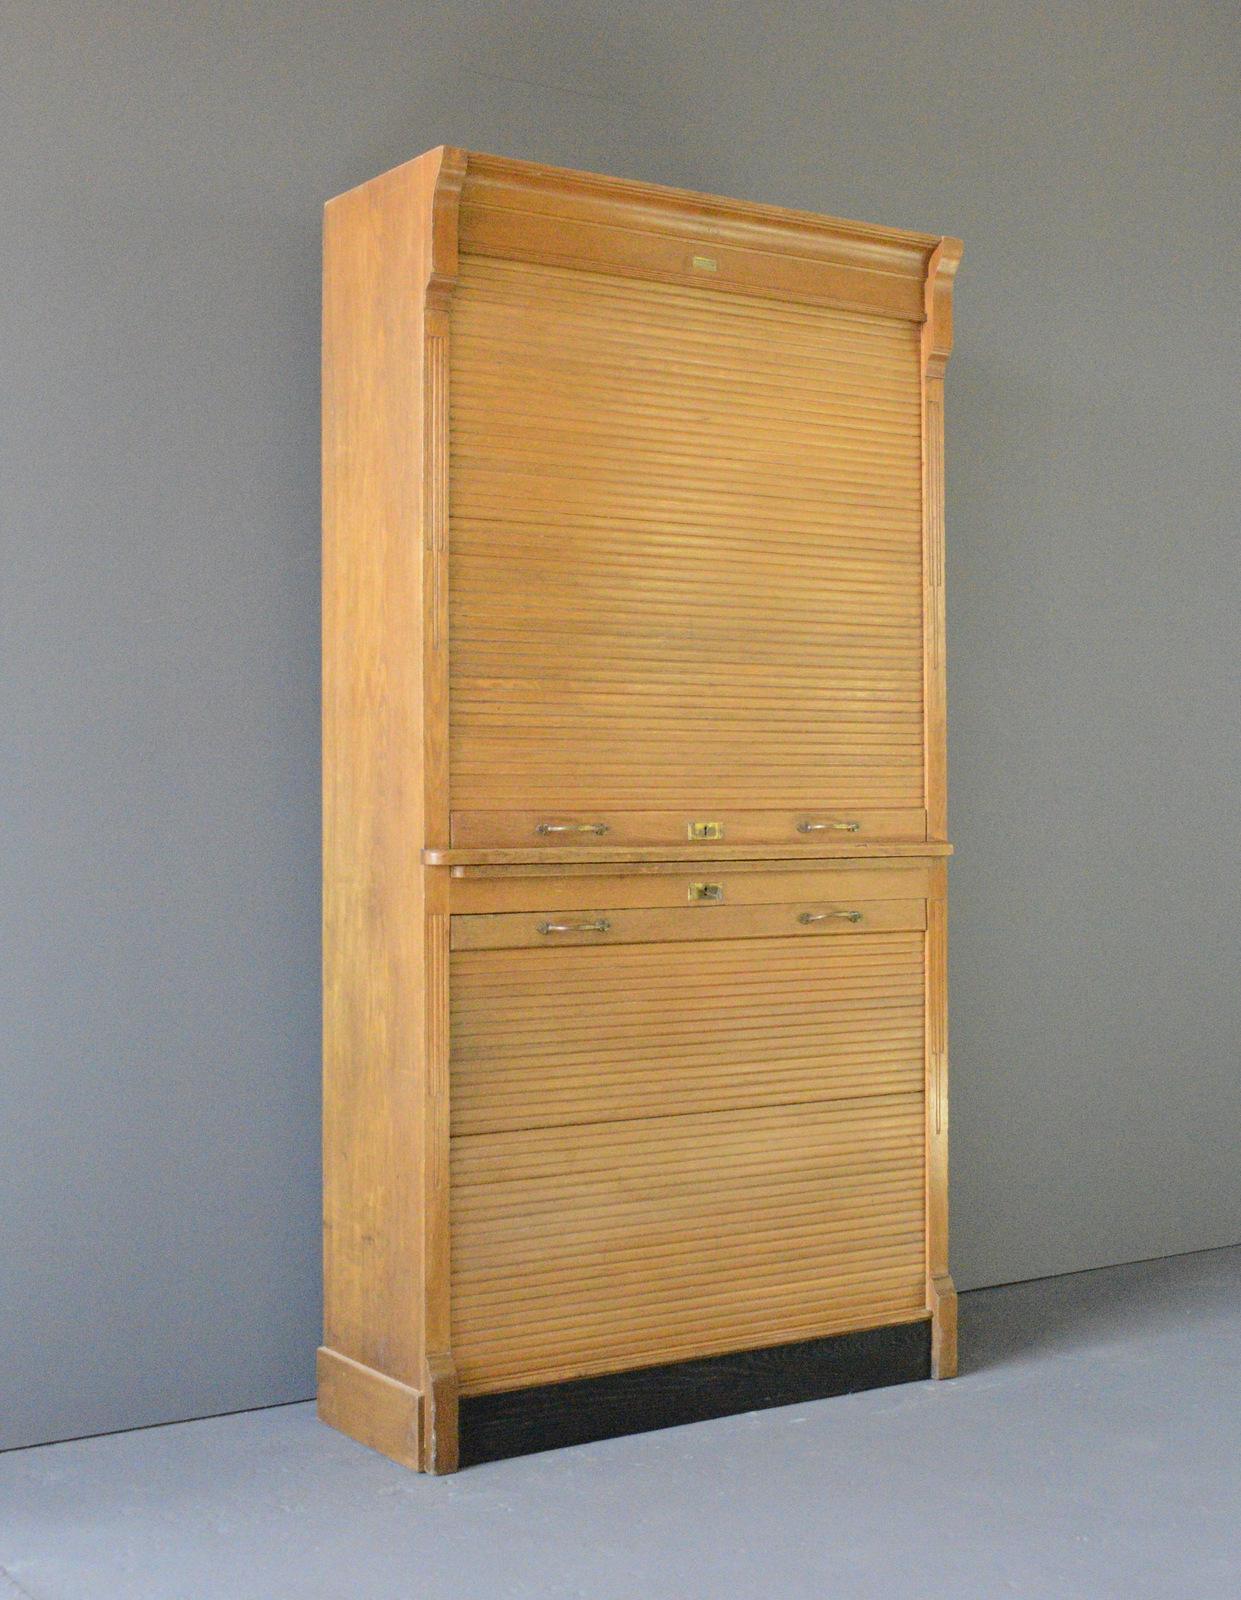 Tambour Fronted Cabinet circa 1920s

- 2 Tambour shutters
- Original solid Brass handles
- Pine shelves with Oak frame
- Made by Gebruder Scholl, Zurich
- Swiss~ 1920s
- 93cm wide x 43cm deep x 213cm tall

Condition Report

Both tambours